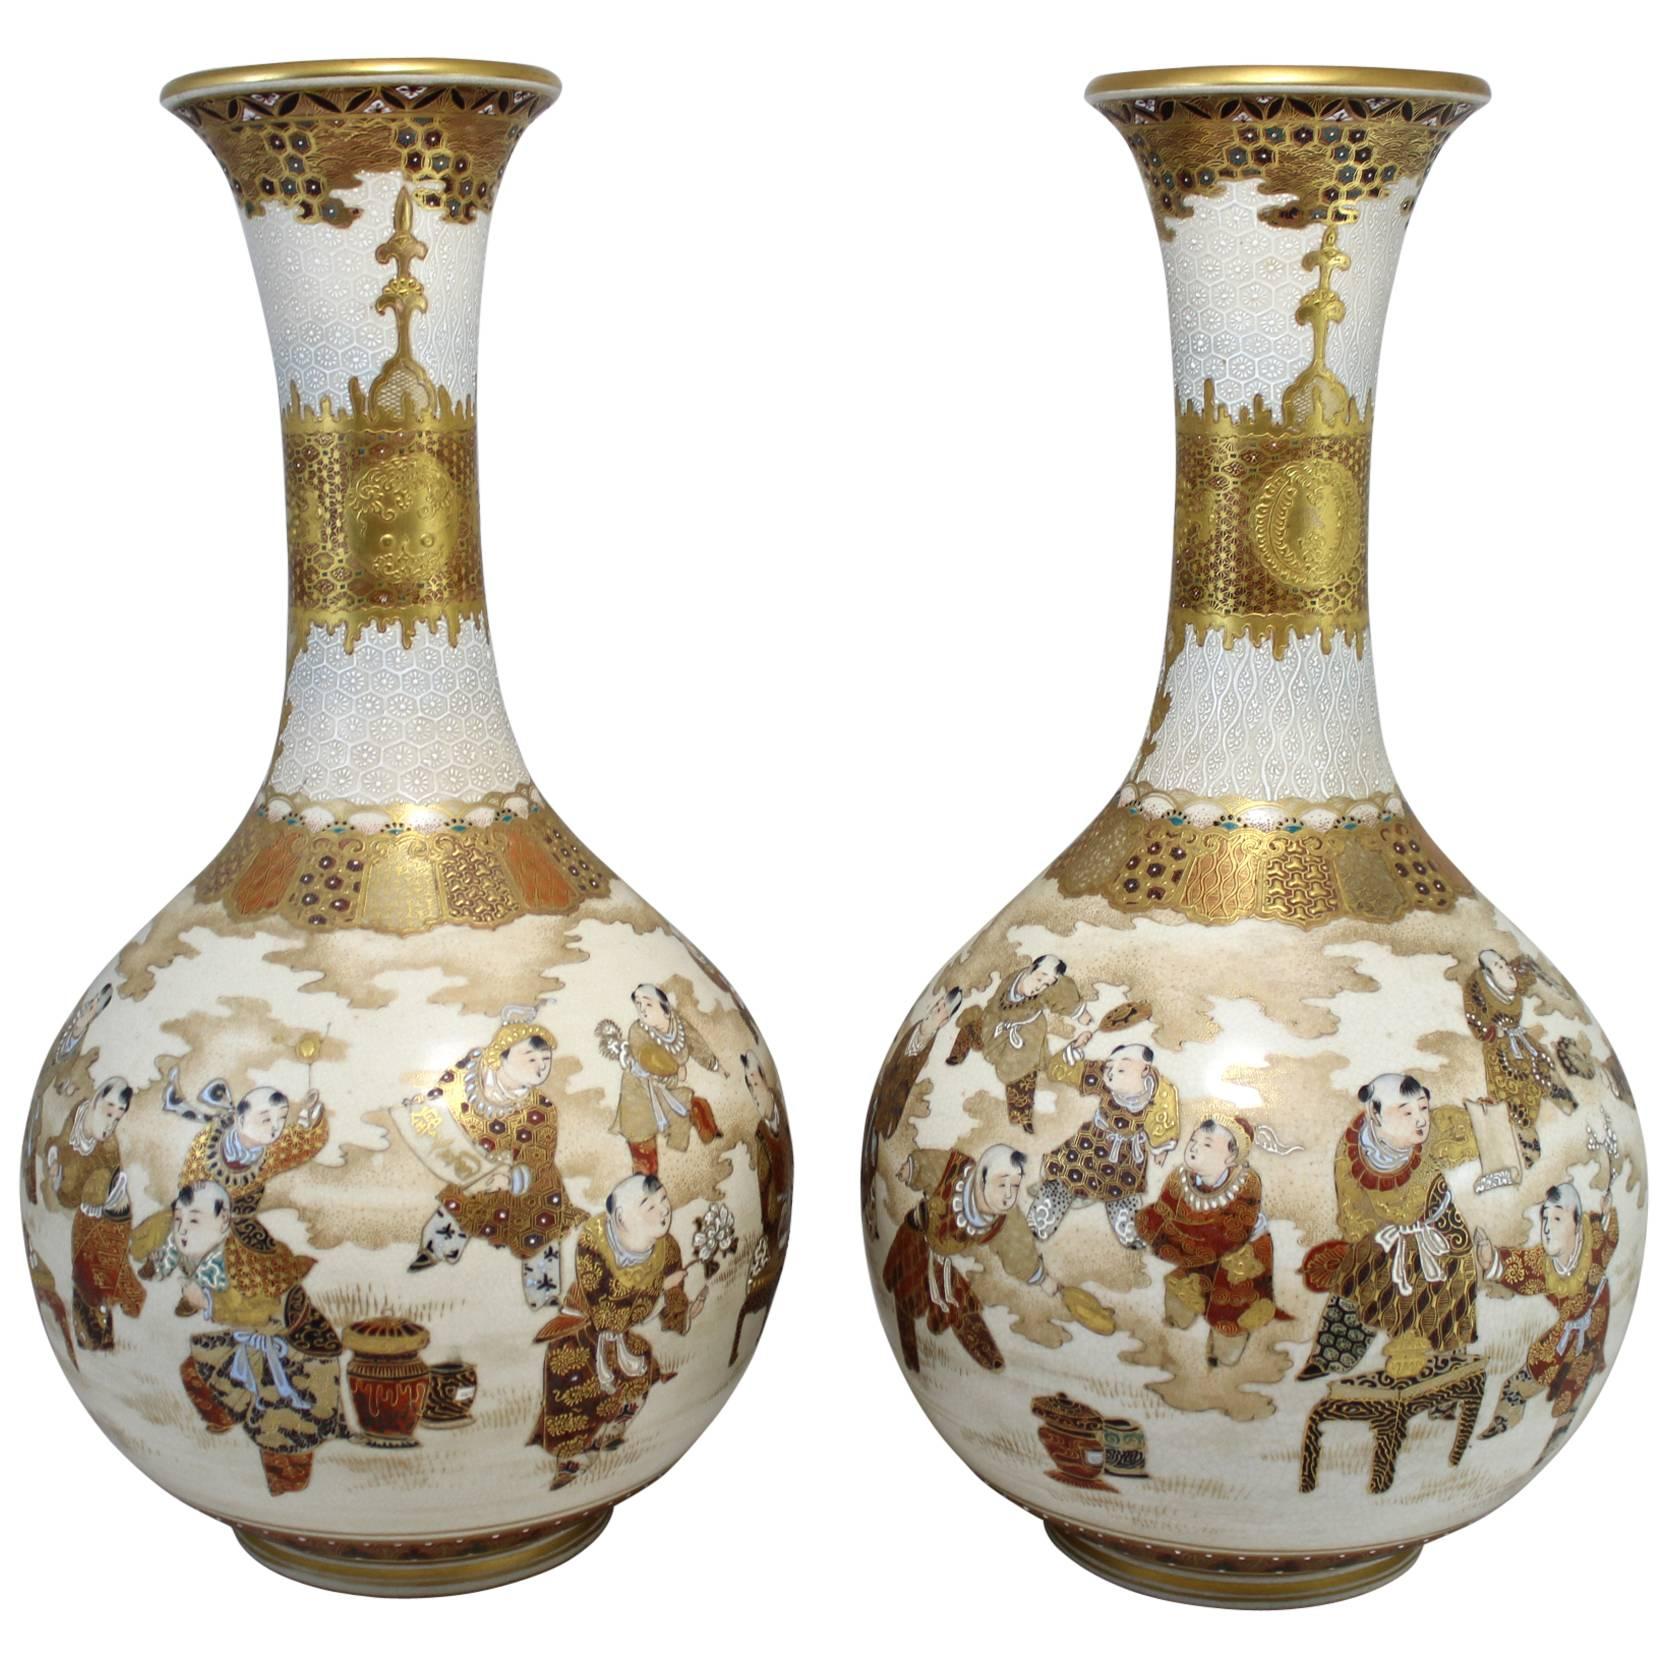 Pair of Late 19th Century Japanese Satsuma Vases with Figural Decoration